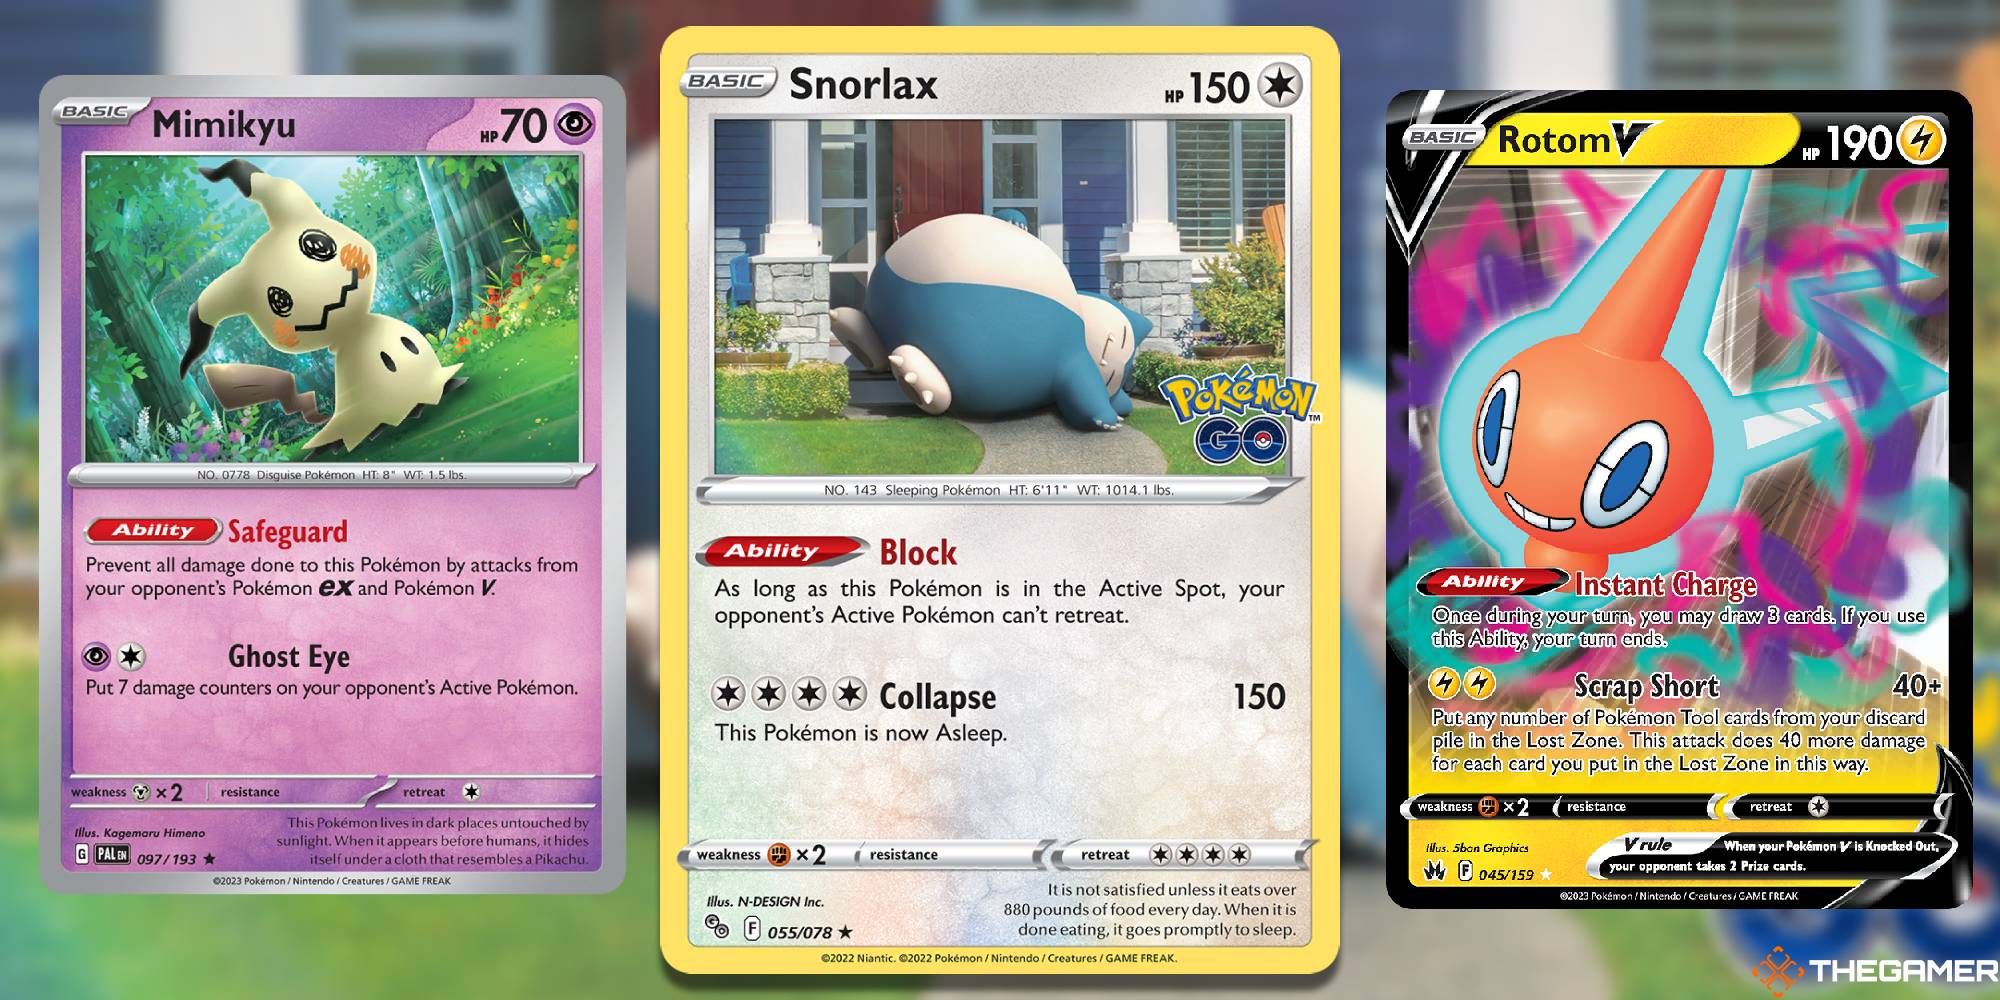 Pokemon TCG cards Snorlax, Rotom V, and Mimikyu, against a background of the Snorlax card art-2